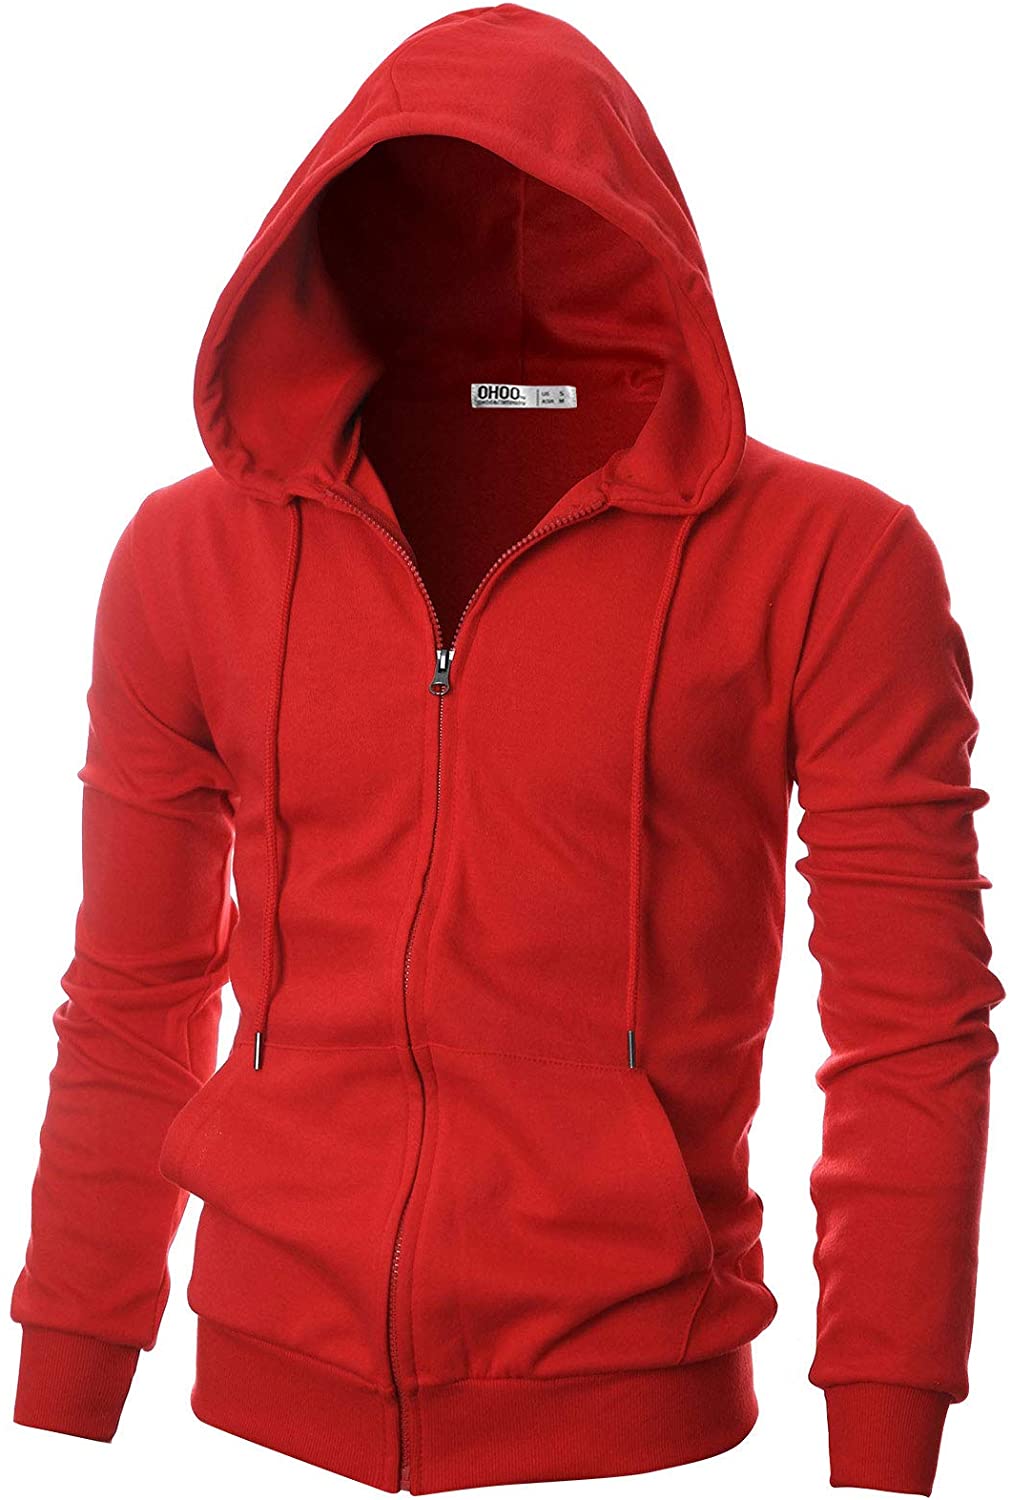 Ohoo Mens Slim Fit Long Sleeve Lightweight Cotton Blend Pullover Hoodie With Kanga Pocket